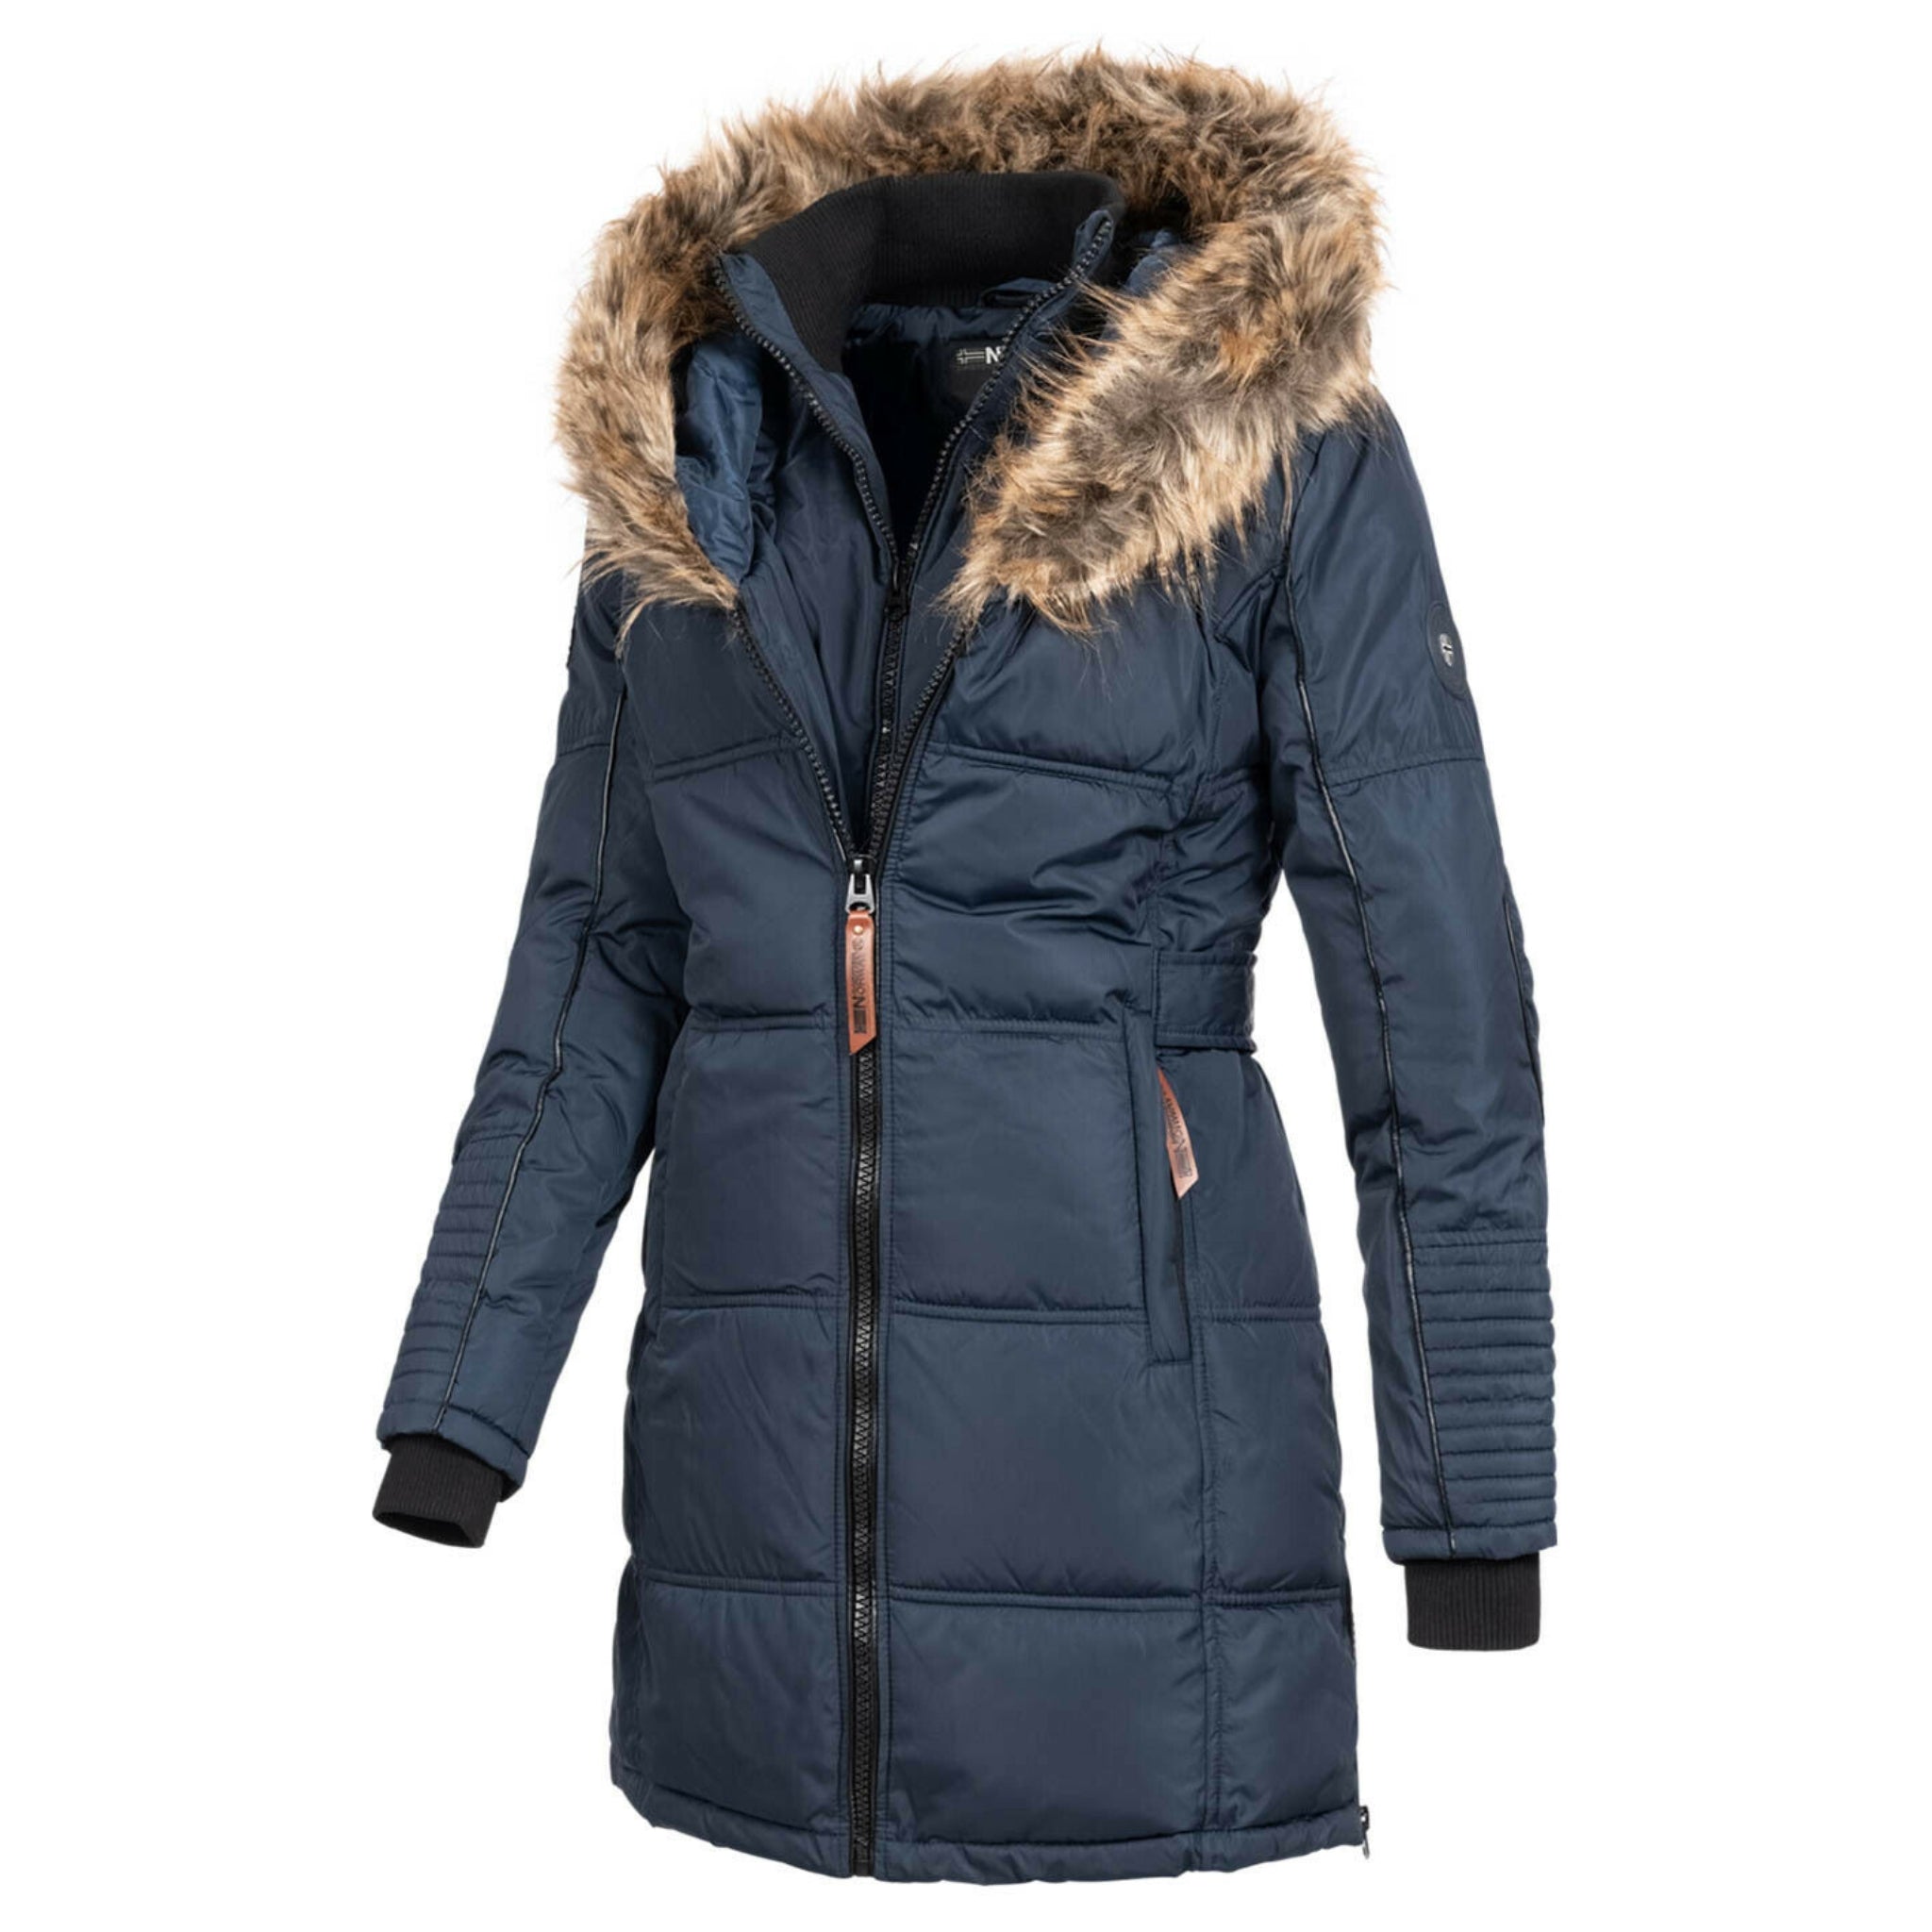 Parka Marcas Geographical Norway Mujer